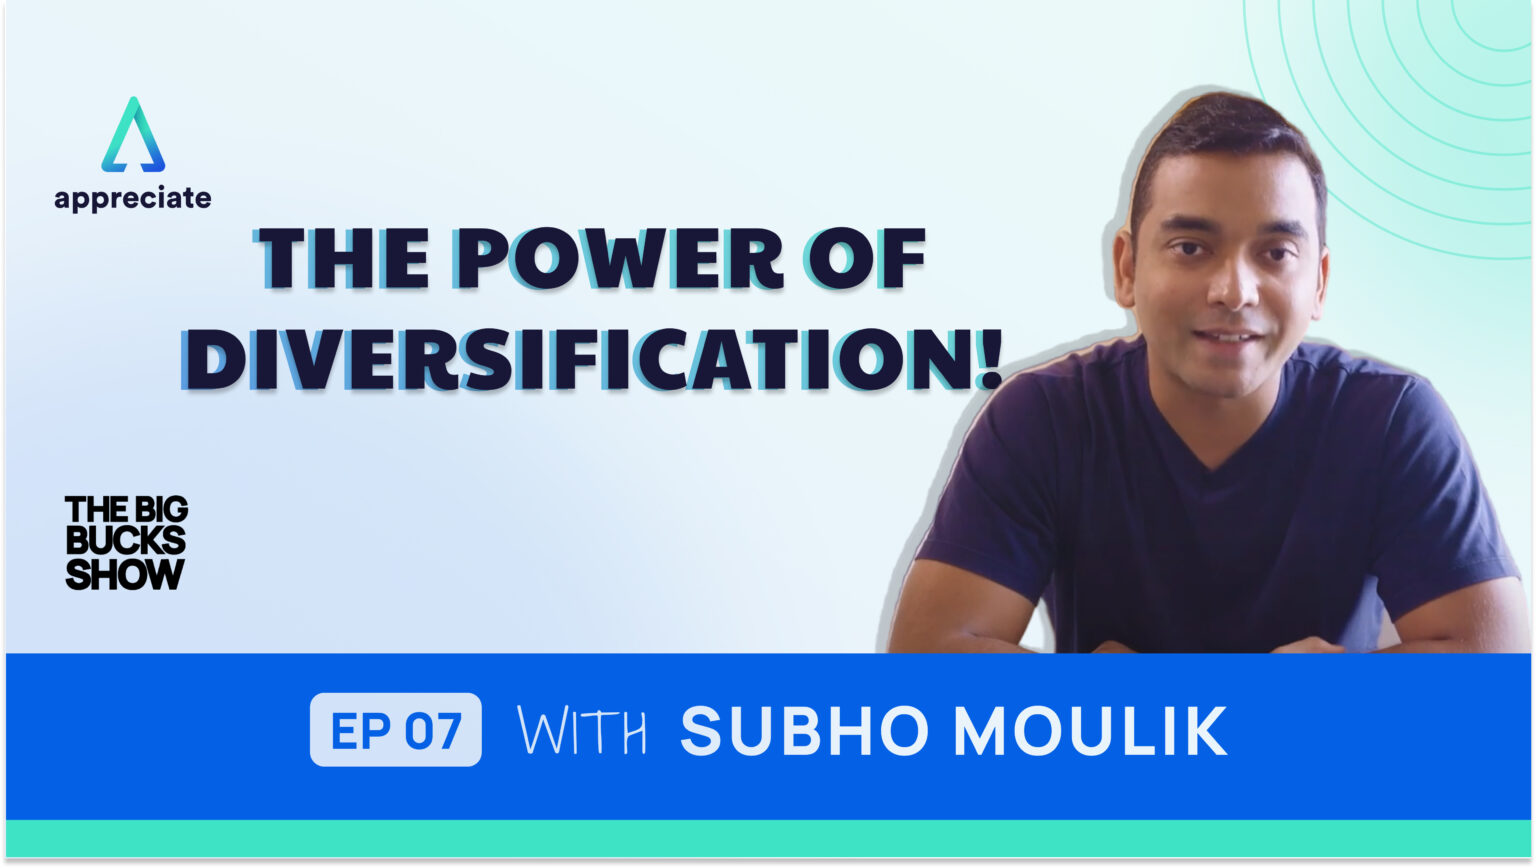 The Power of diversification is the title of a podcast that is hosted by Subho. This is also a YouTube video thumbnail.